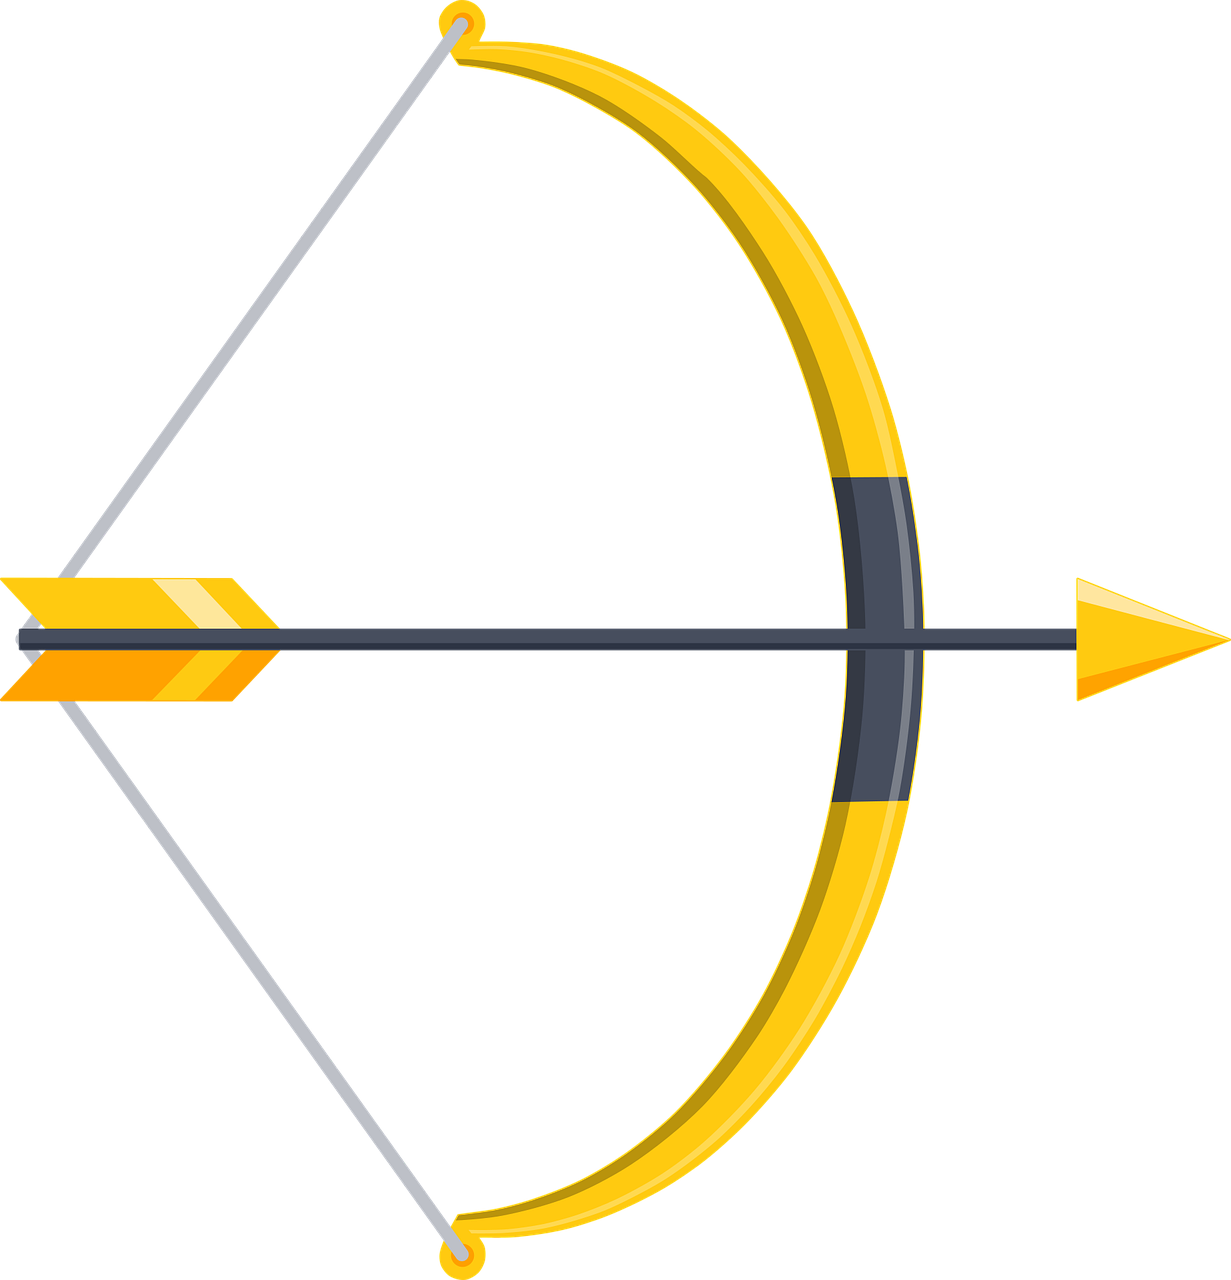 a bow and arrow on a black background, vector art, yellow aureole, crossbow, circle iris detailed structure, screengrab